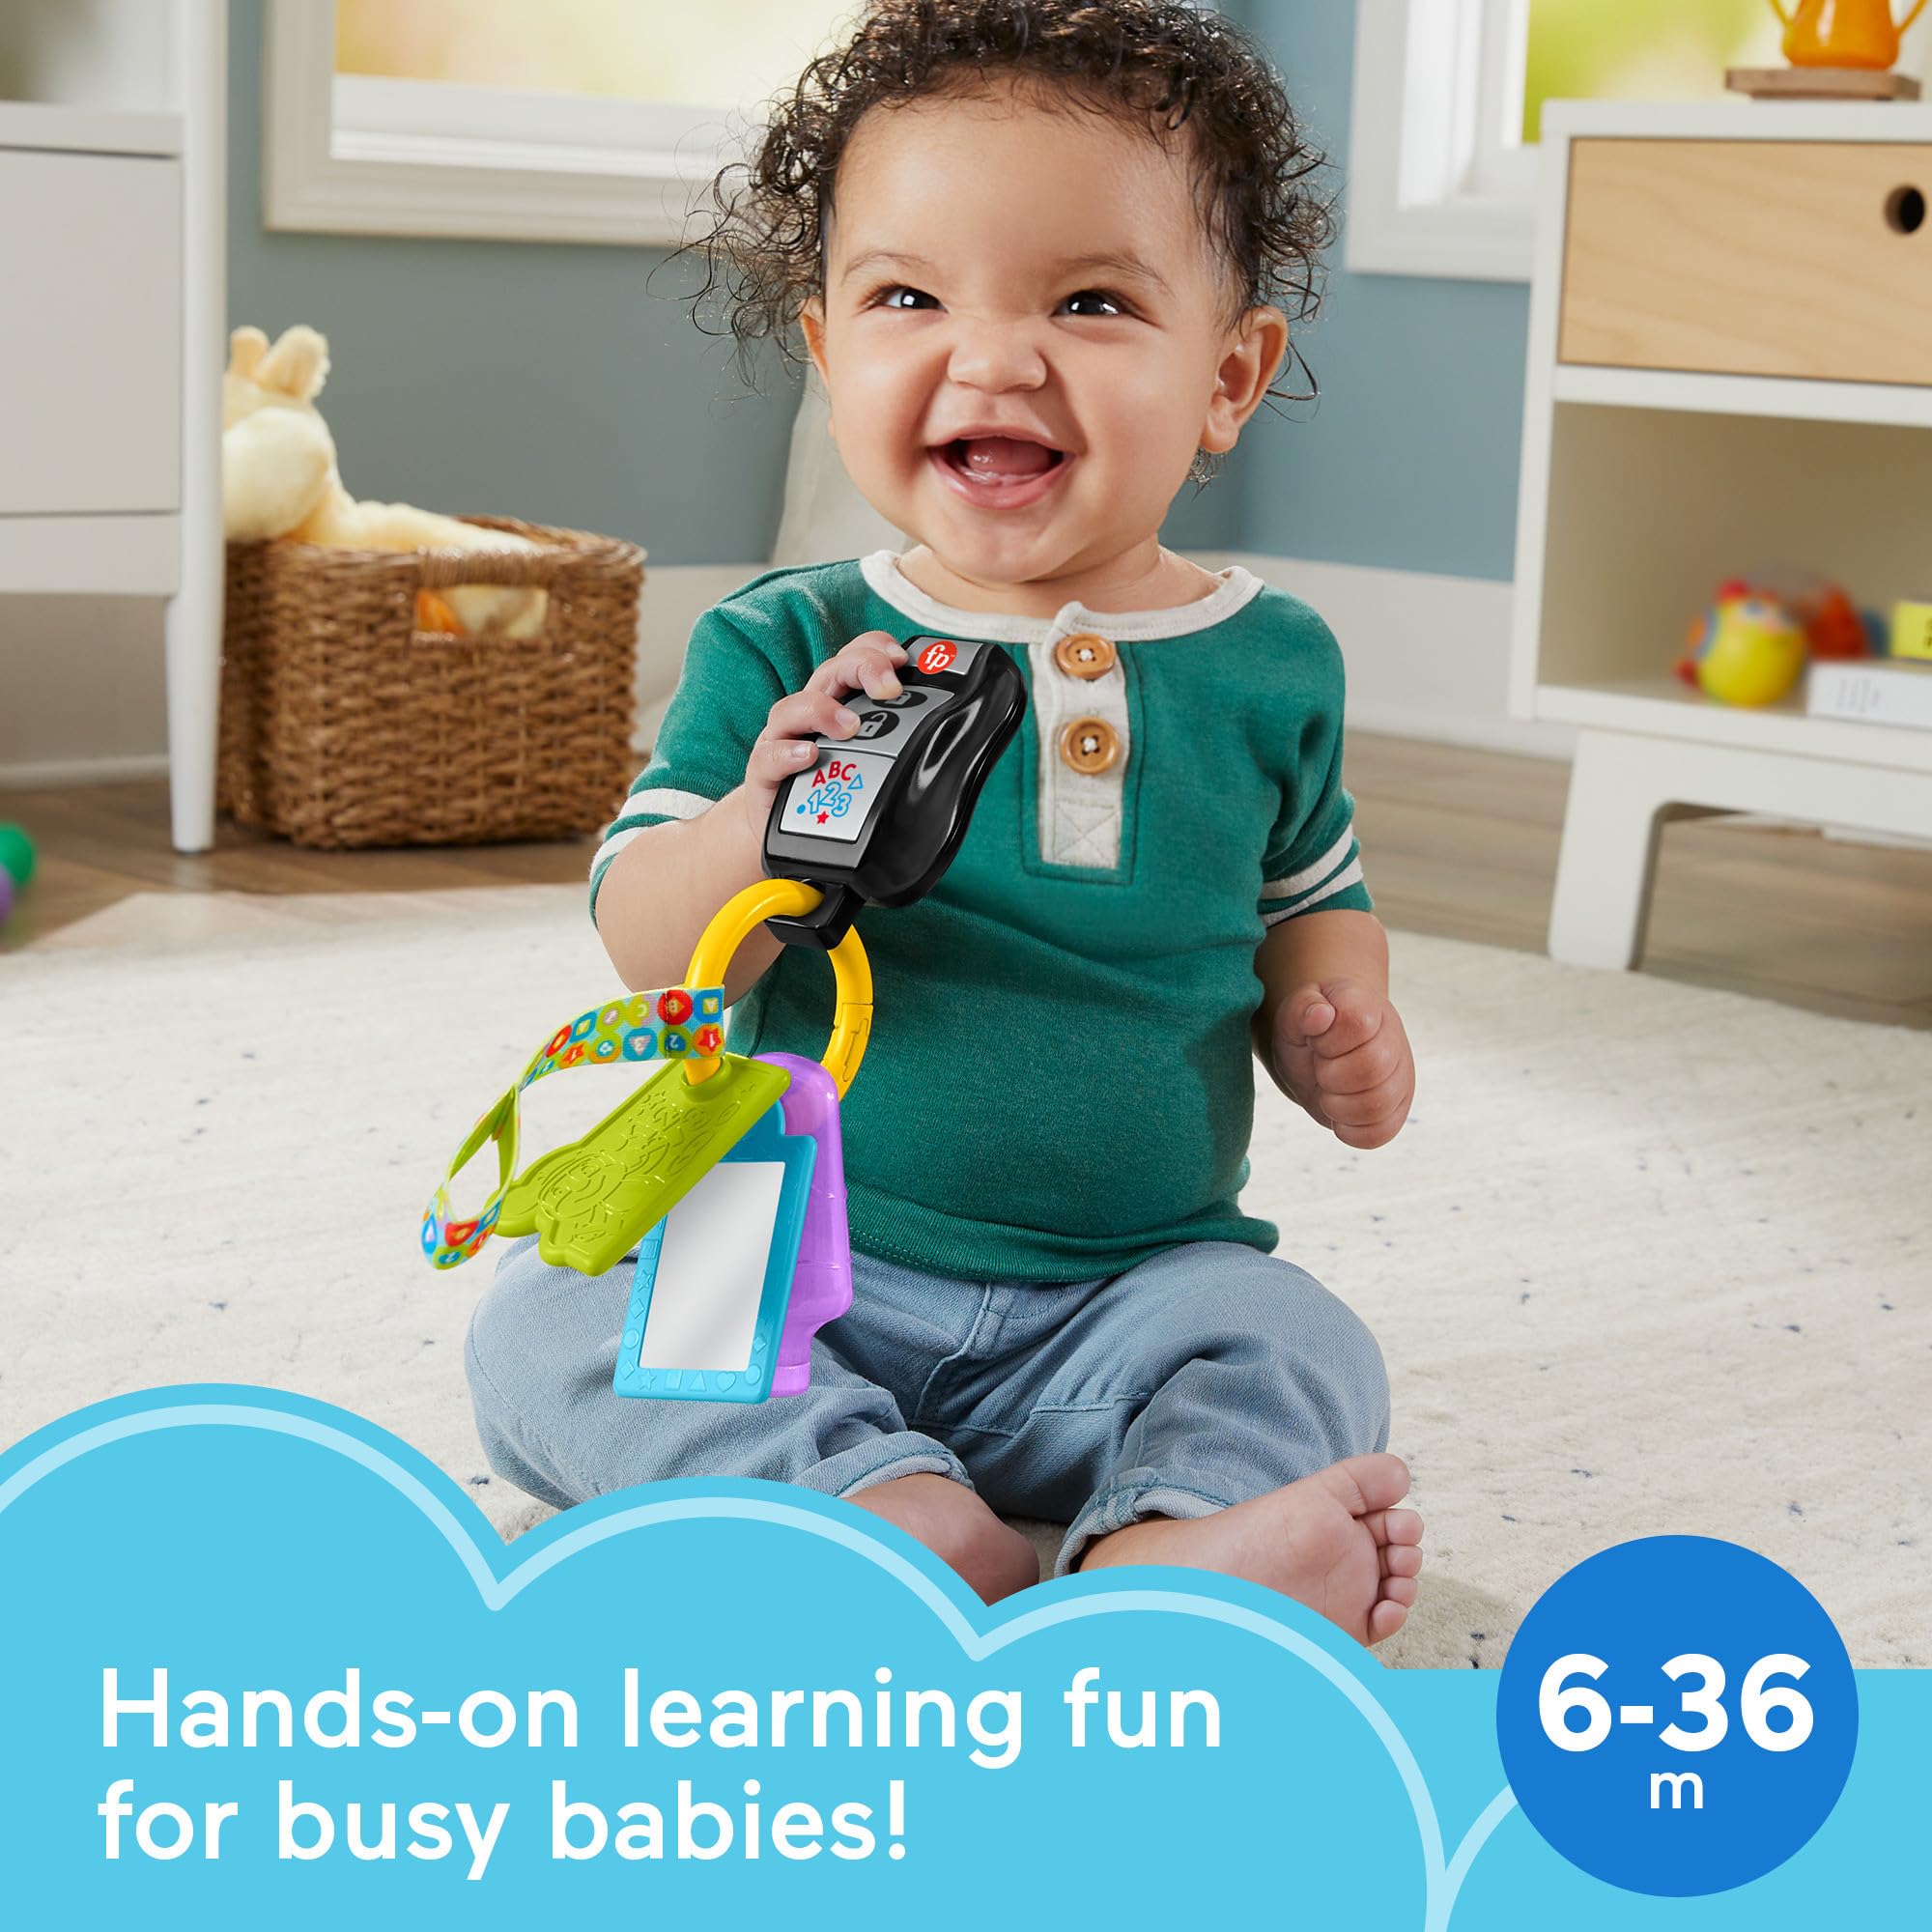 Fisher-Price Laugh & Learn Baby Travel Toy Play & Go Activity Keys with Learning Music, Teether & Mirror for Ages 6+ Months